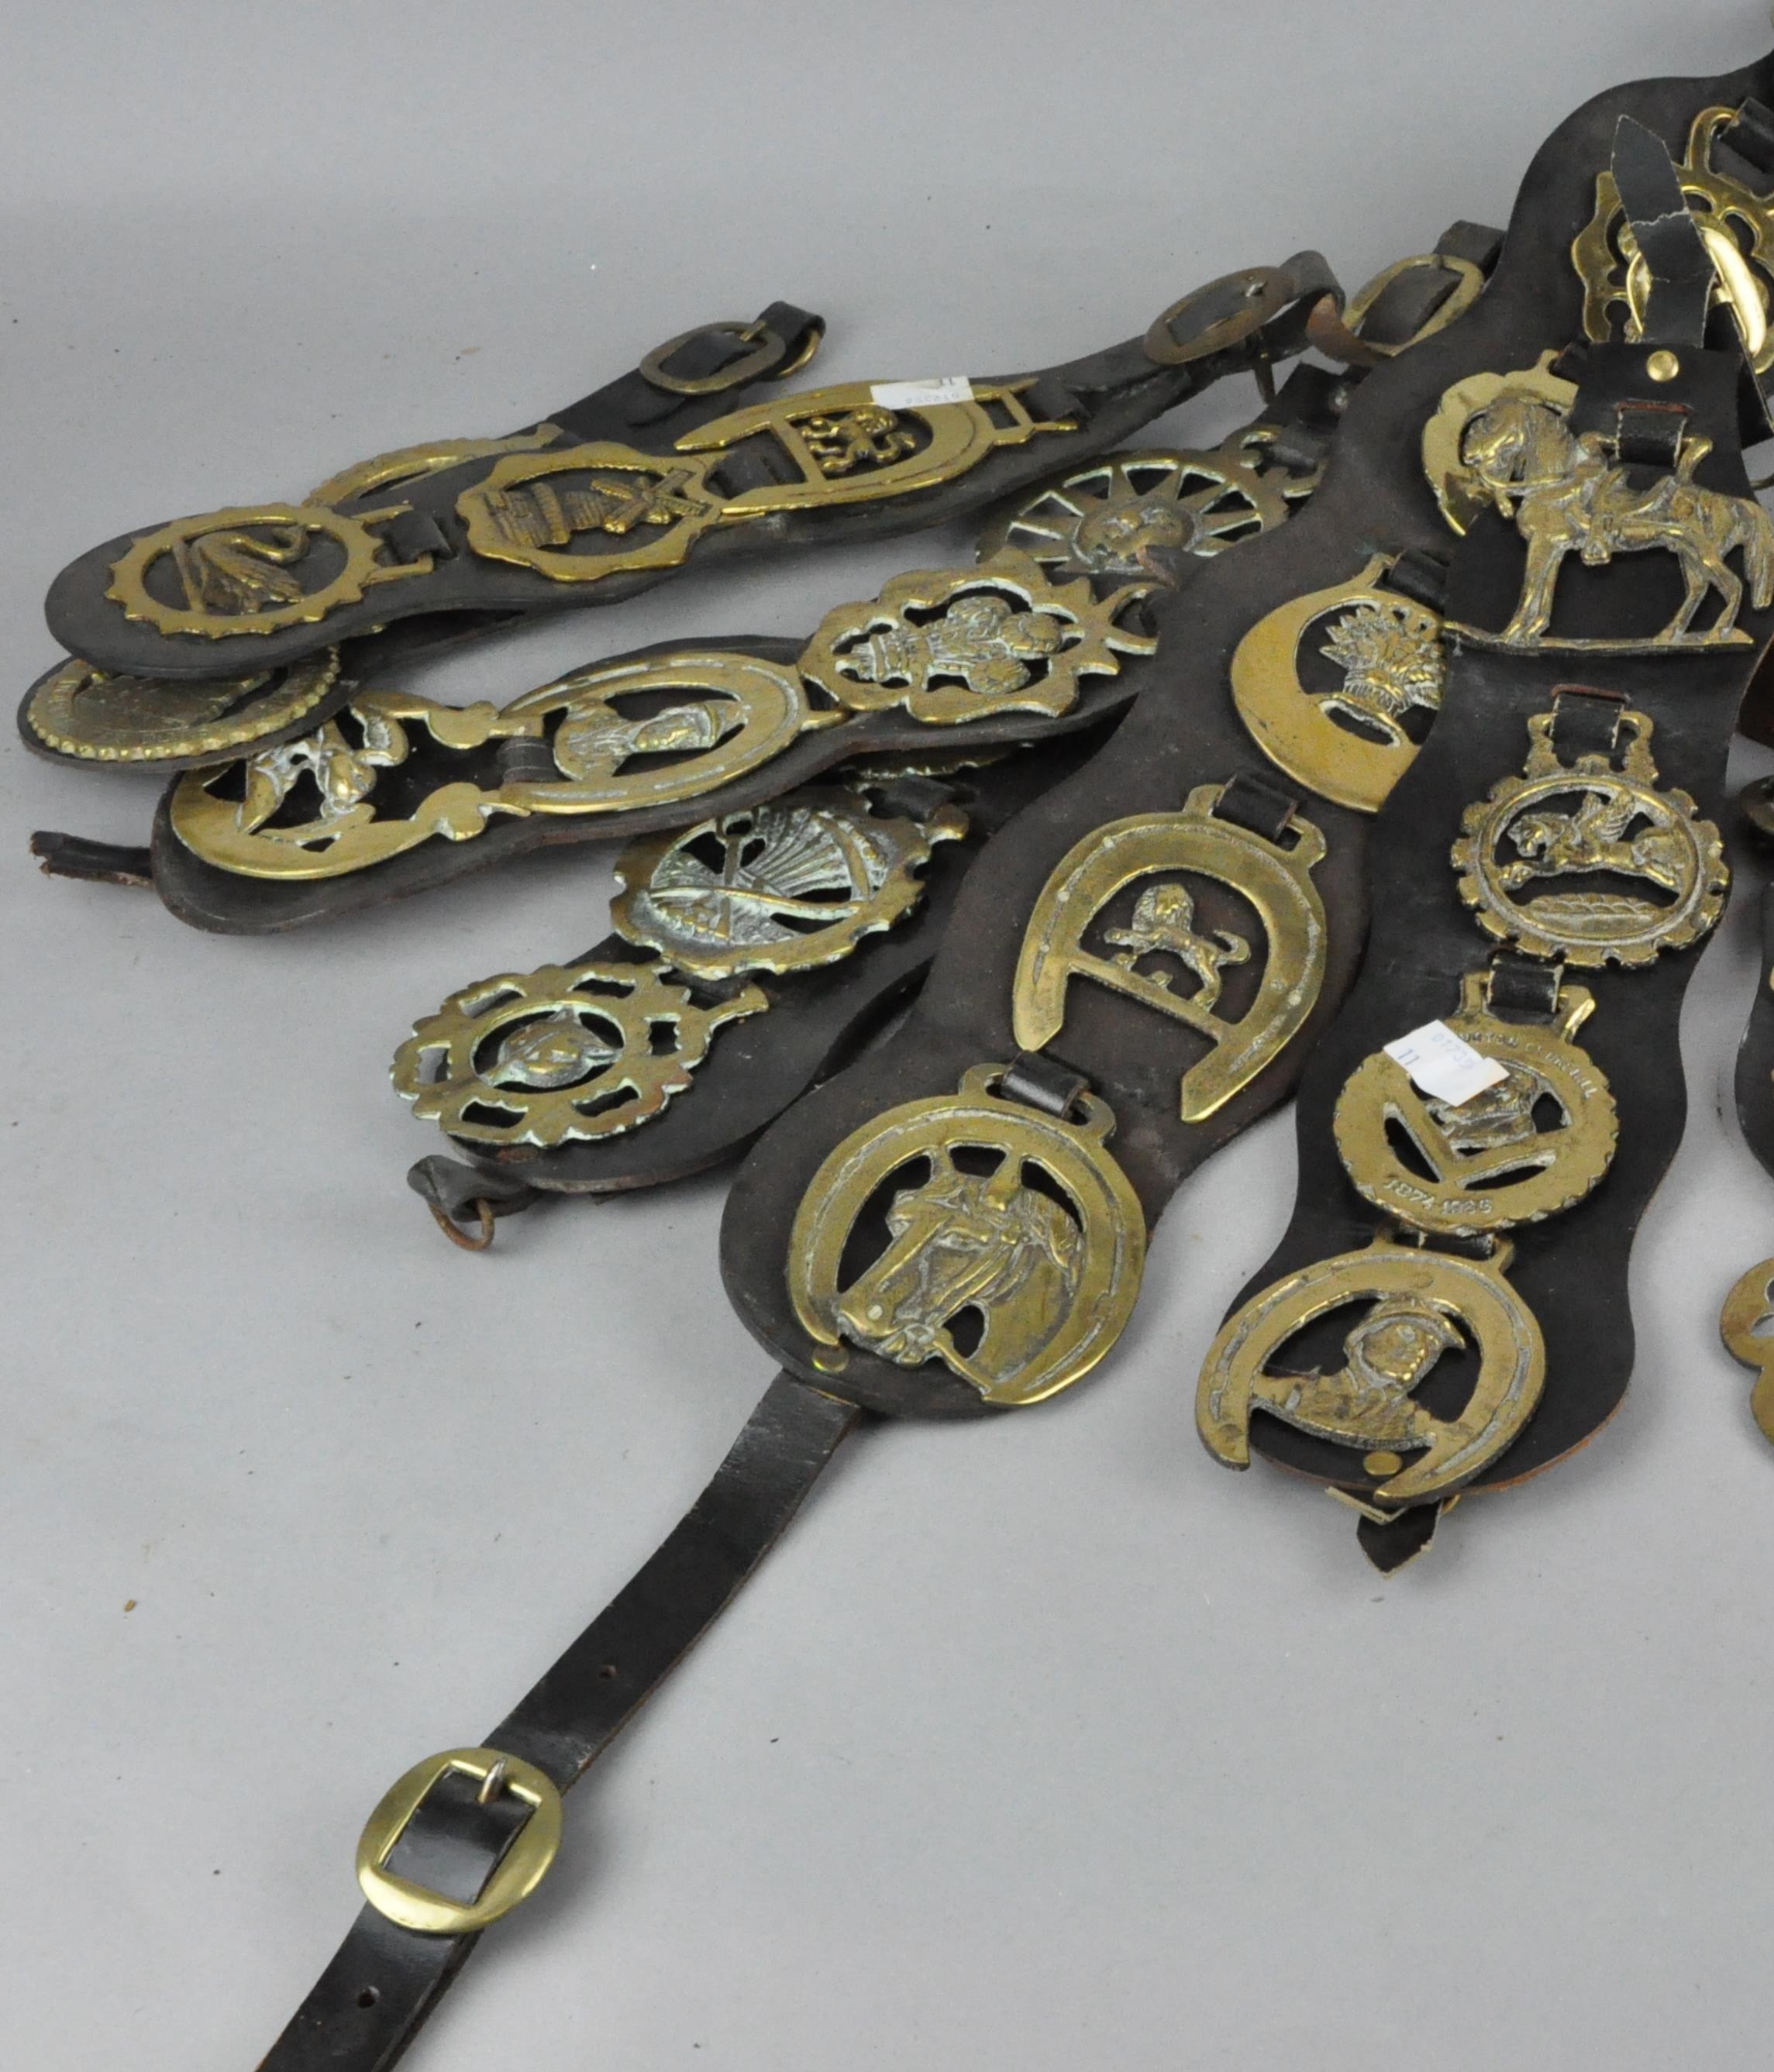 A group of horse brasses, mounted on leather straps,